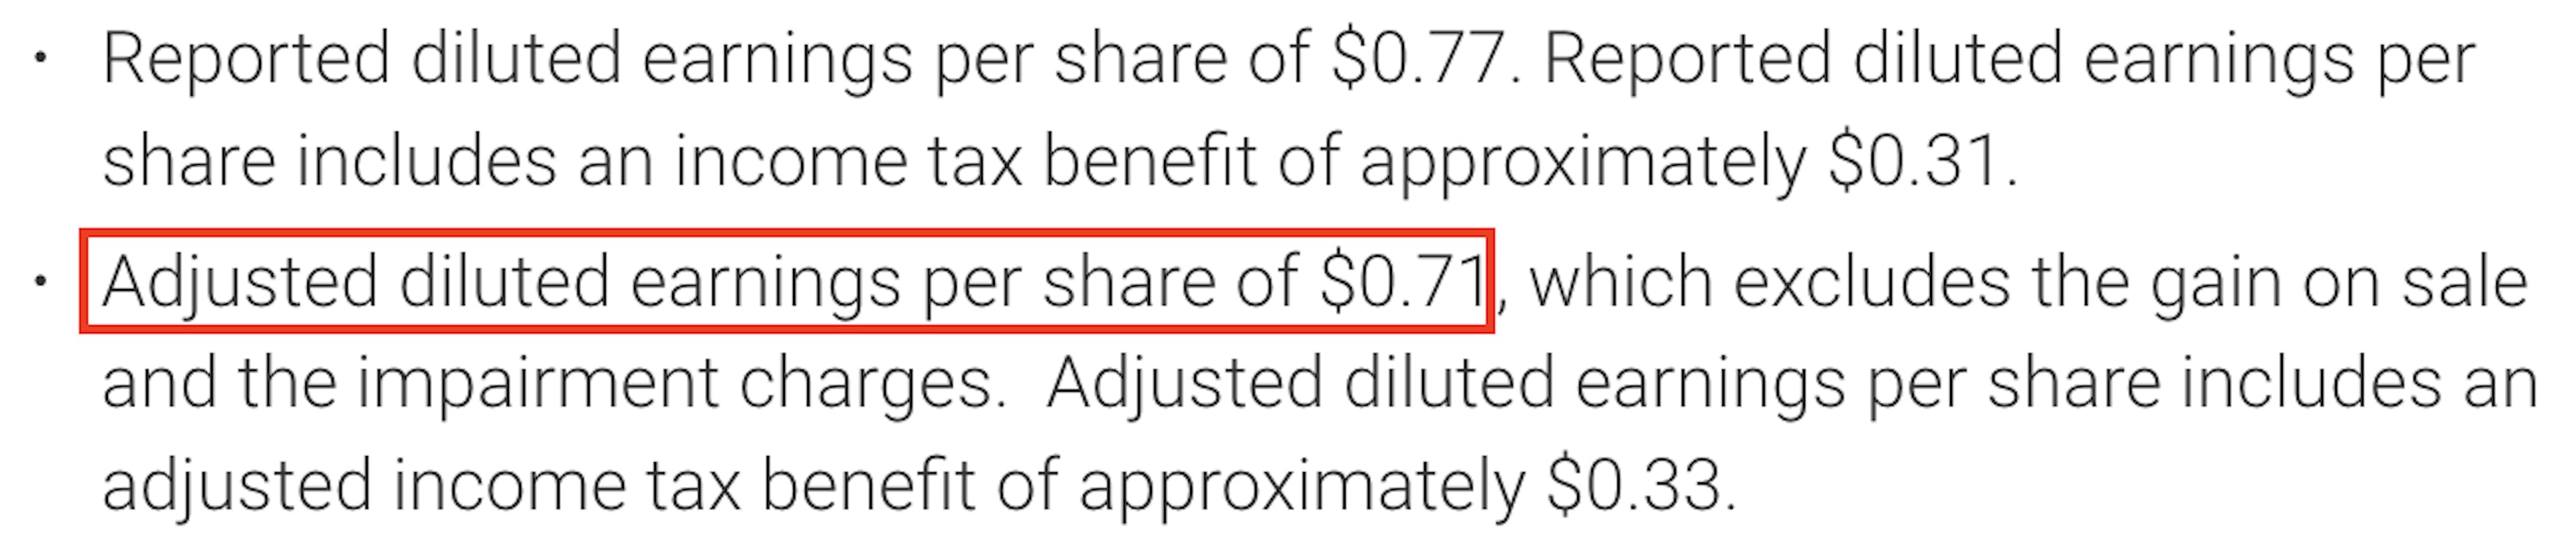 Figure 3. Gap Inc. fiscal report excerpt on diluted earnings per share.